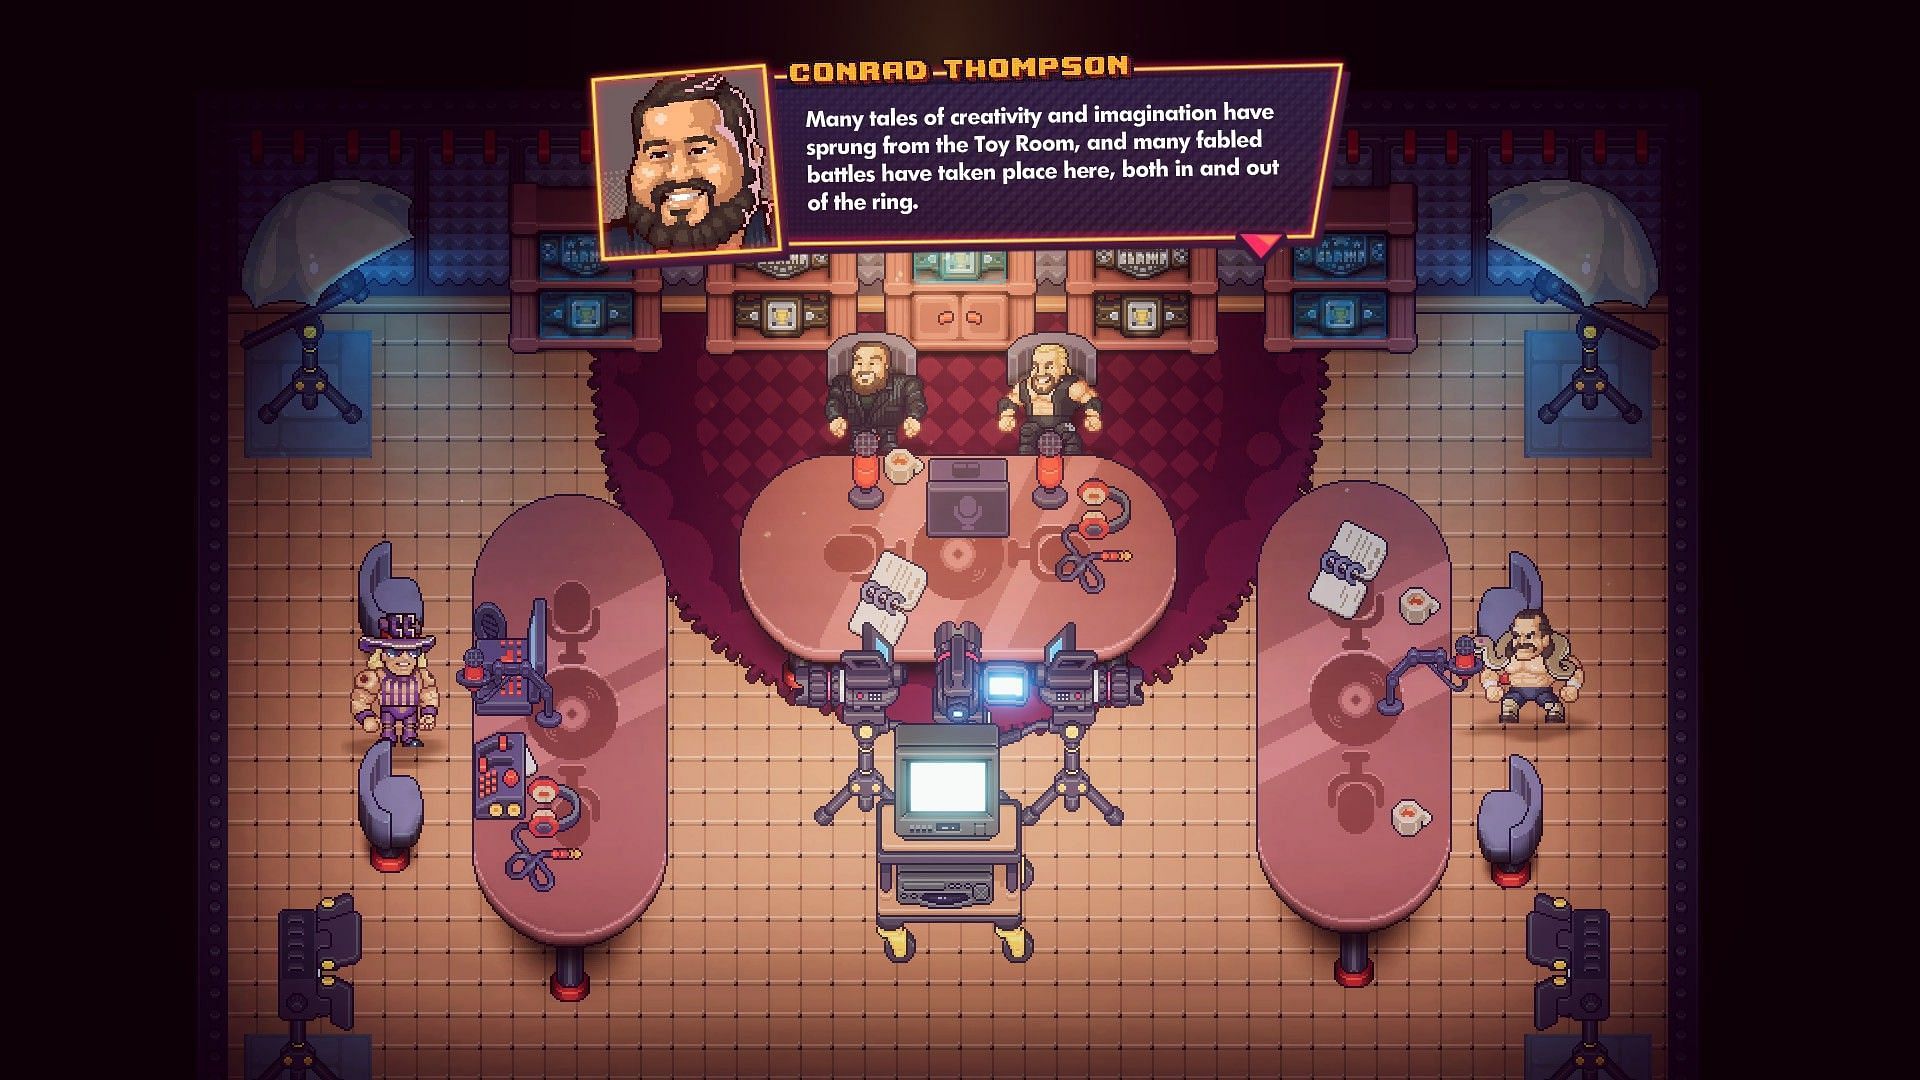 WrestleQuest the wrestling RPG will release in August - Explosion